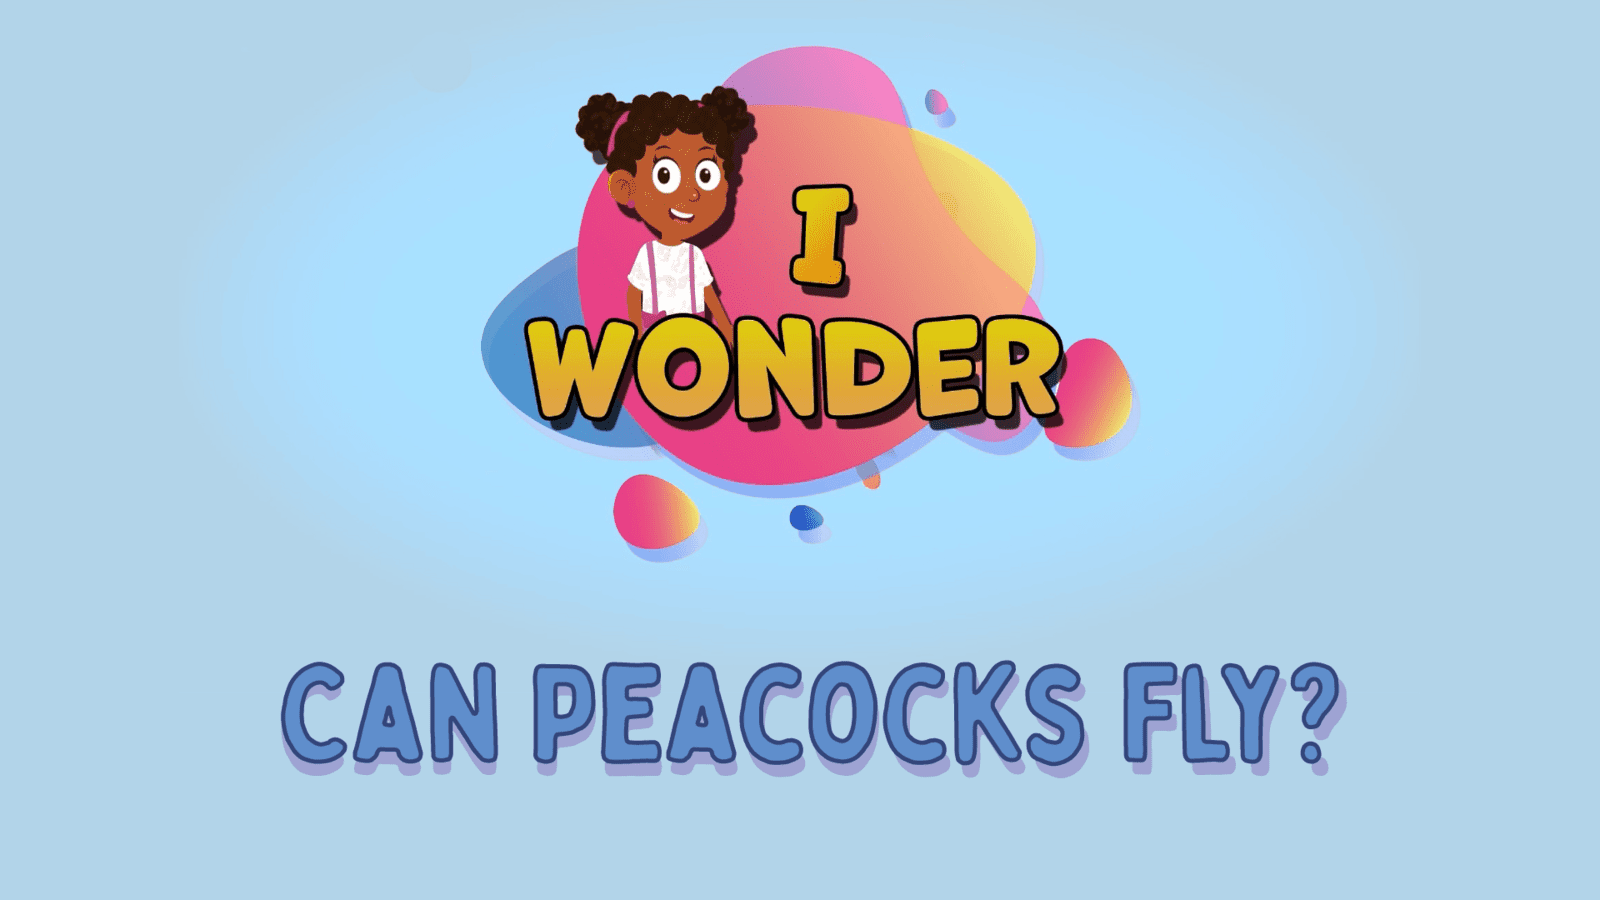 Can Peacocks Fly?